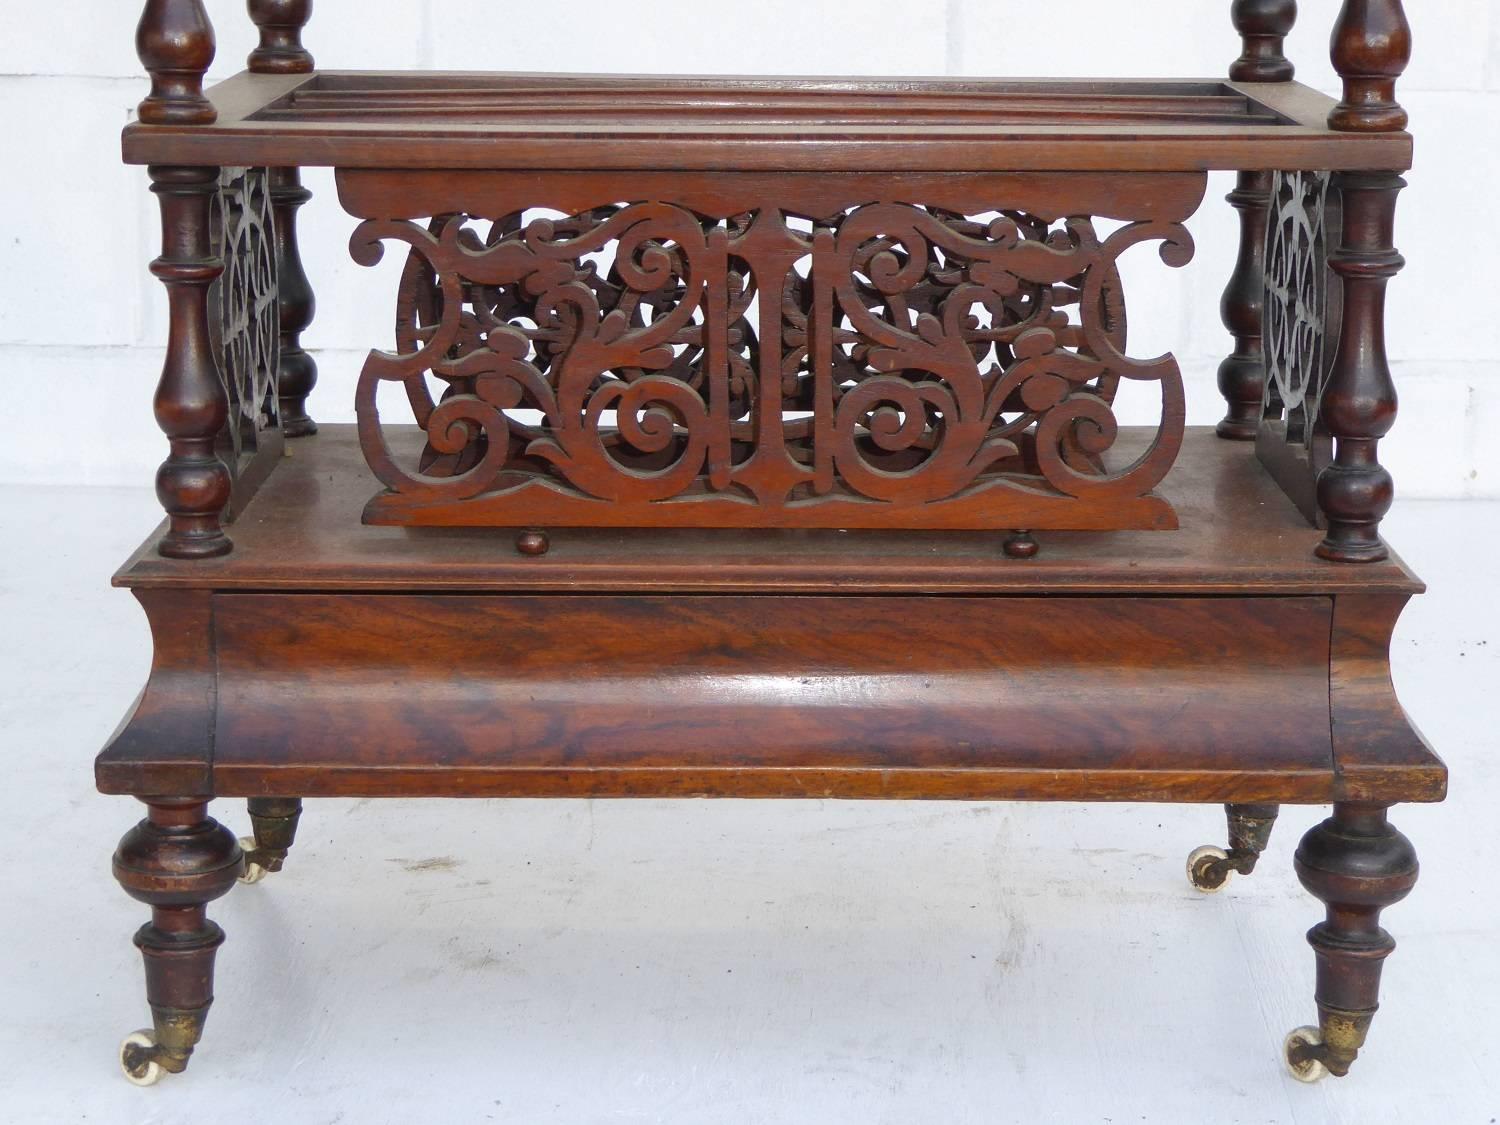 For sale is a good quality Victorian burr walnut Canterbury. The top of the Canterbury has a fretwork gallery above four columns with further fretwork below above a single drawer. This piece is in good condition, with minor wear commensurate with